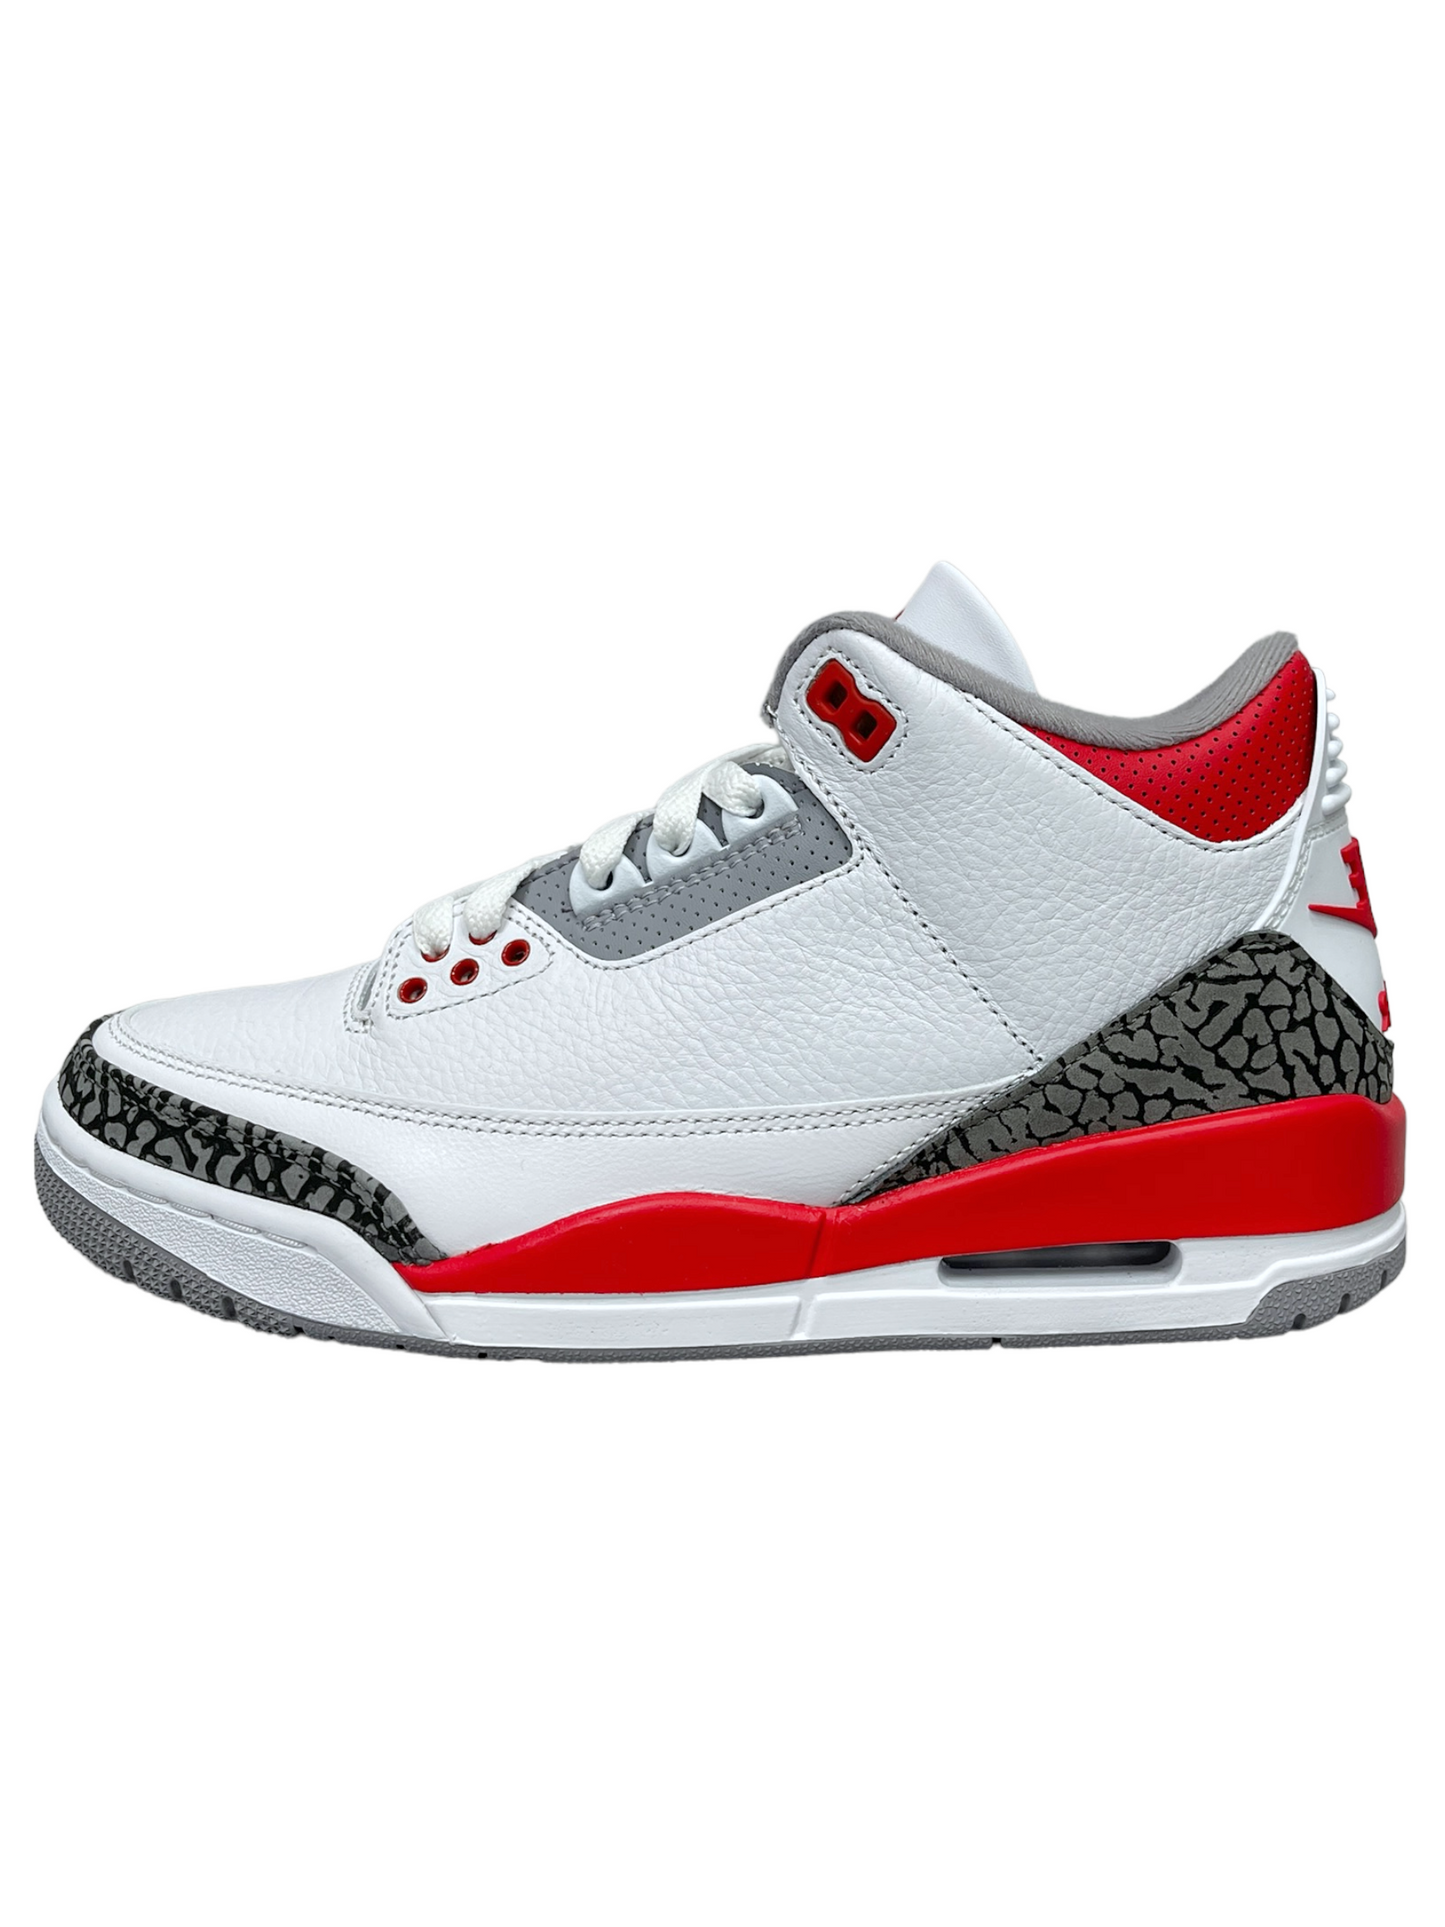 Jordan 3 Retro Fire Red - Genuine Design Luxury Consignment for Men. New & Pre-Owned Clothing, Shoes, & Accessories. Calgary, Canada